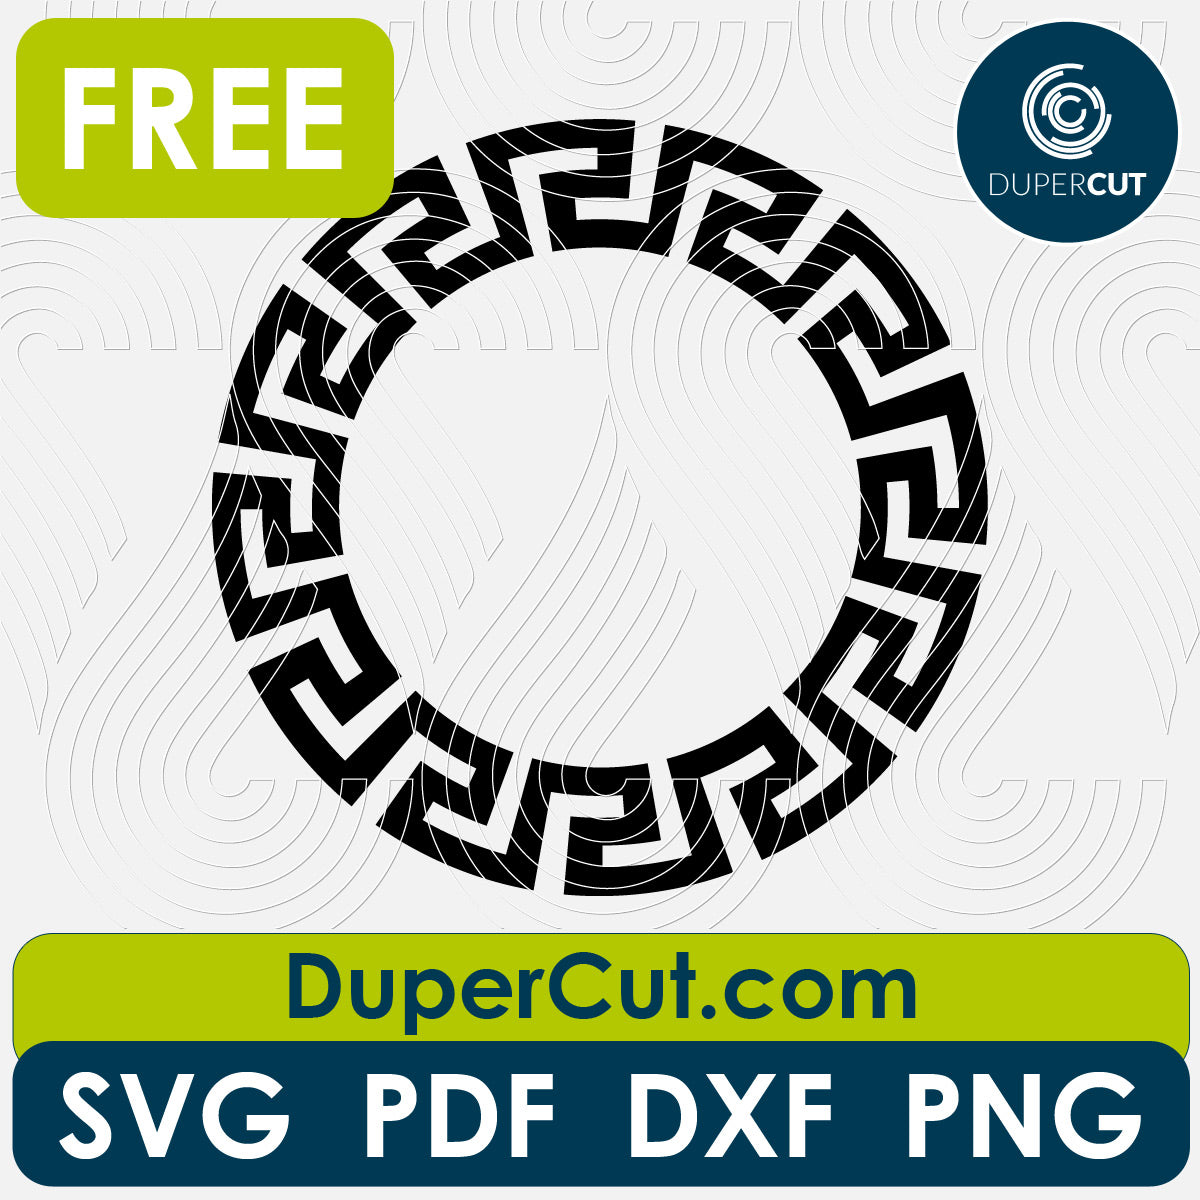 Greek circle frame free cutting template SVG PNG DXF files for Glowforge, Cricut, Silhouette, CNC laser router by DuperCut.com